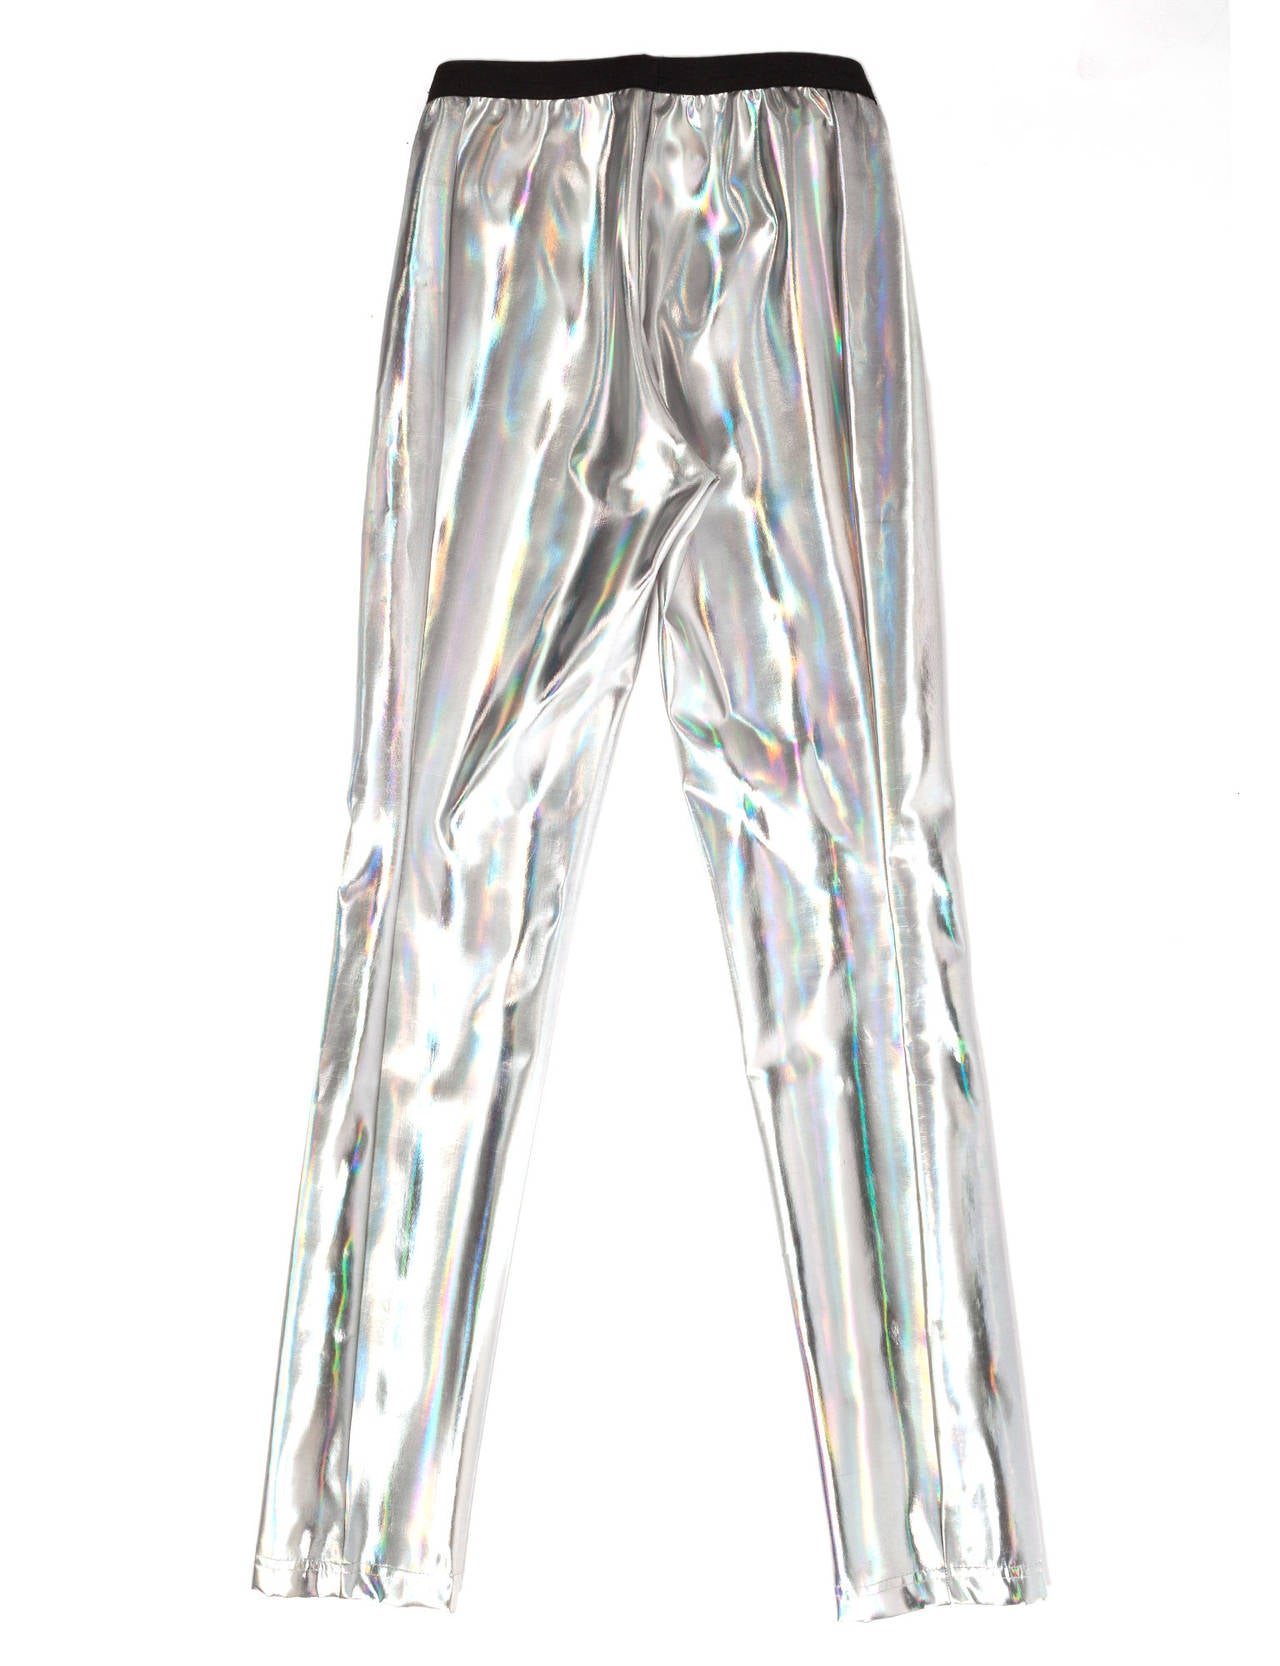 Hussein Chalayan Holographic leggings with a prism effect. Leggings have elastic waist and super narrow tight fit. From the master of illusion Hussein Chalayan. A rare piece of Vintage. Sold out everywhere. 
French size 40, German 36, US 8.